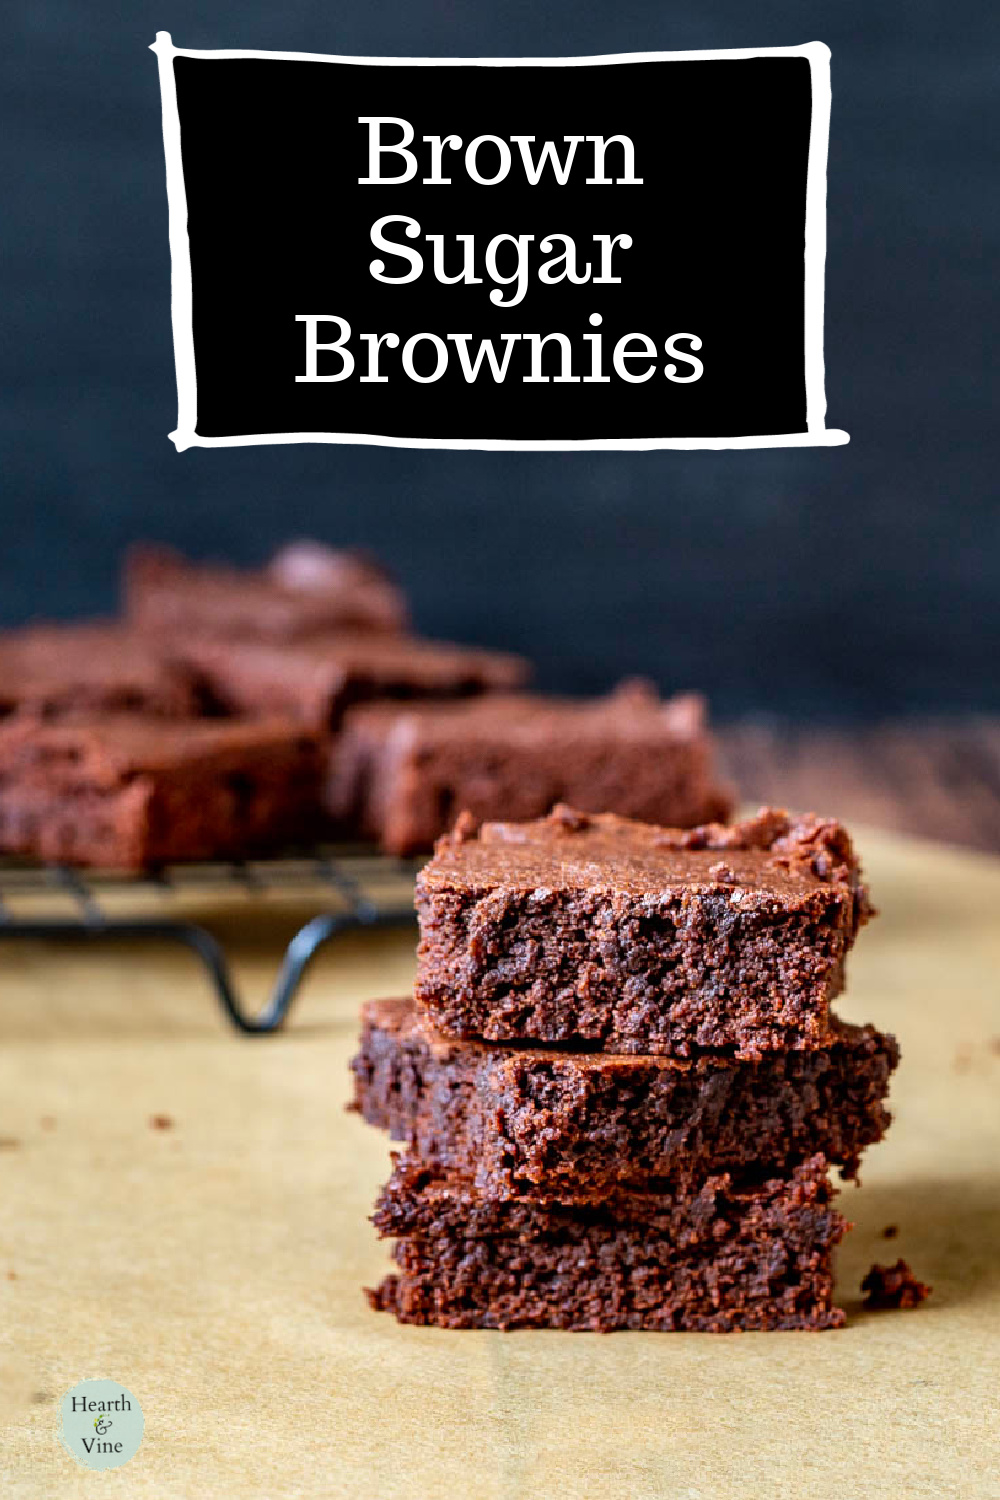 Three brown sugar browns stacked in front of a cooling rack of the same brownies.